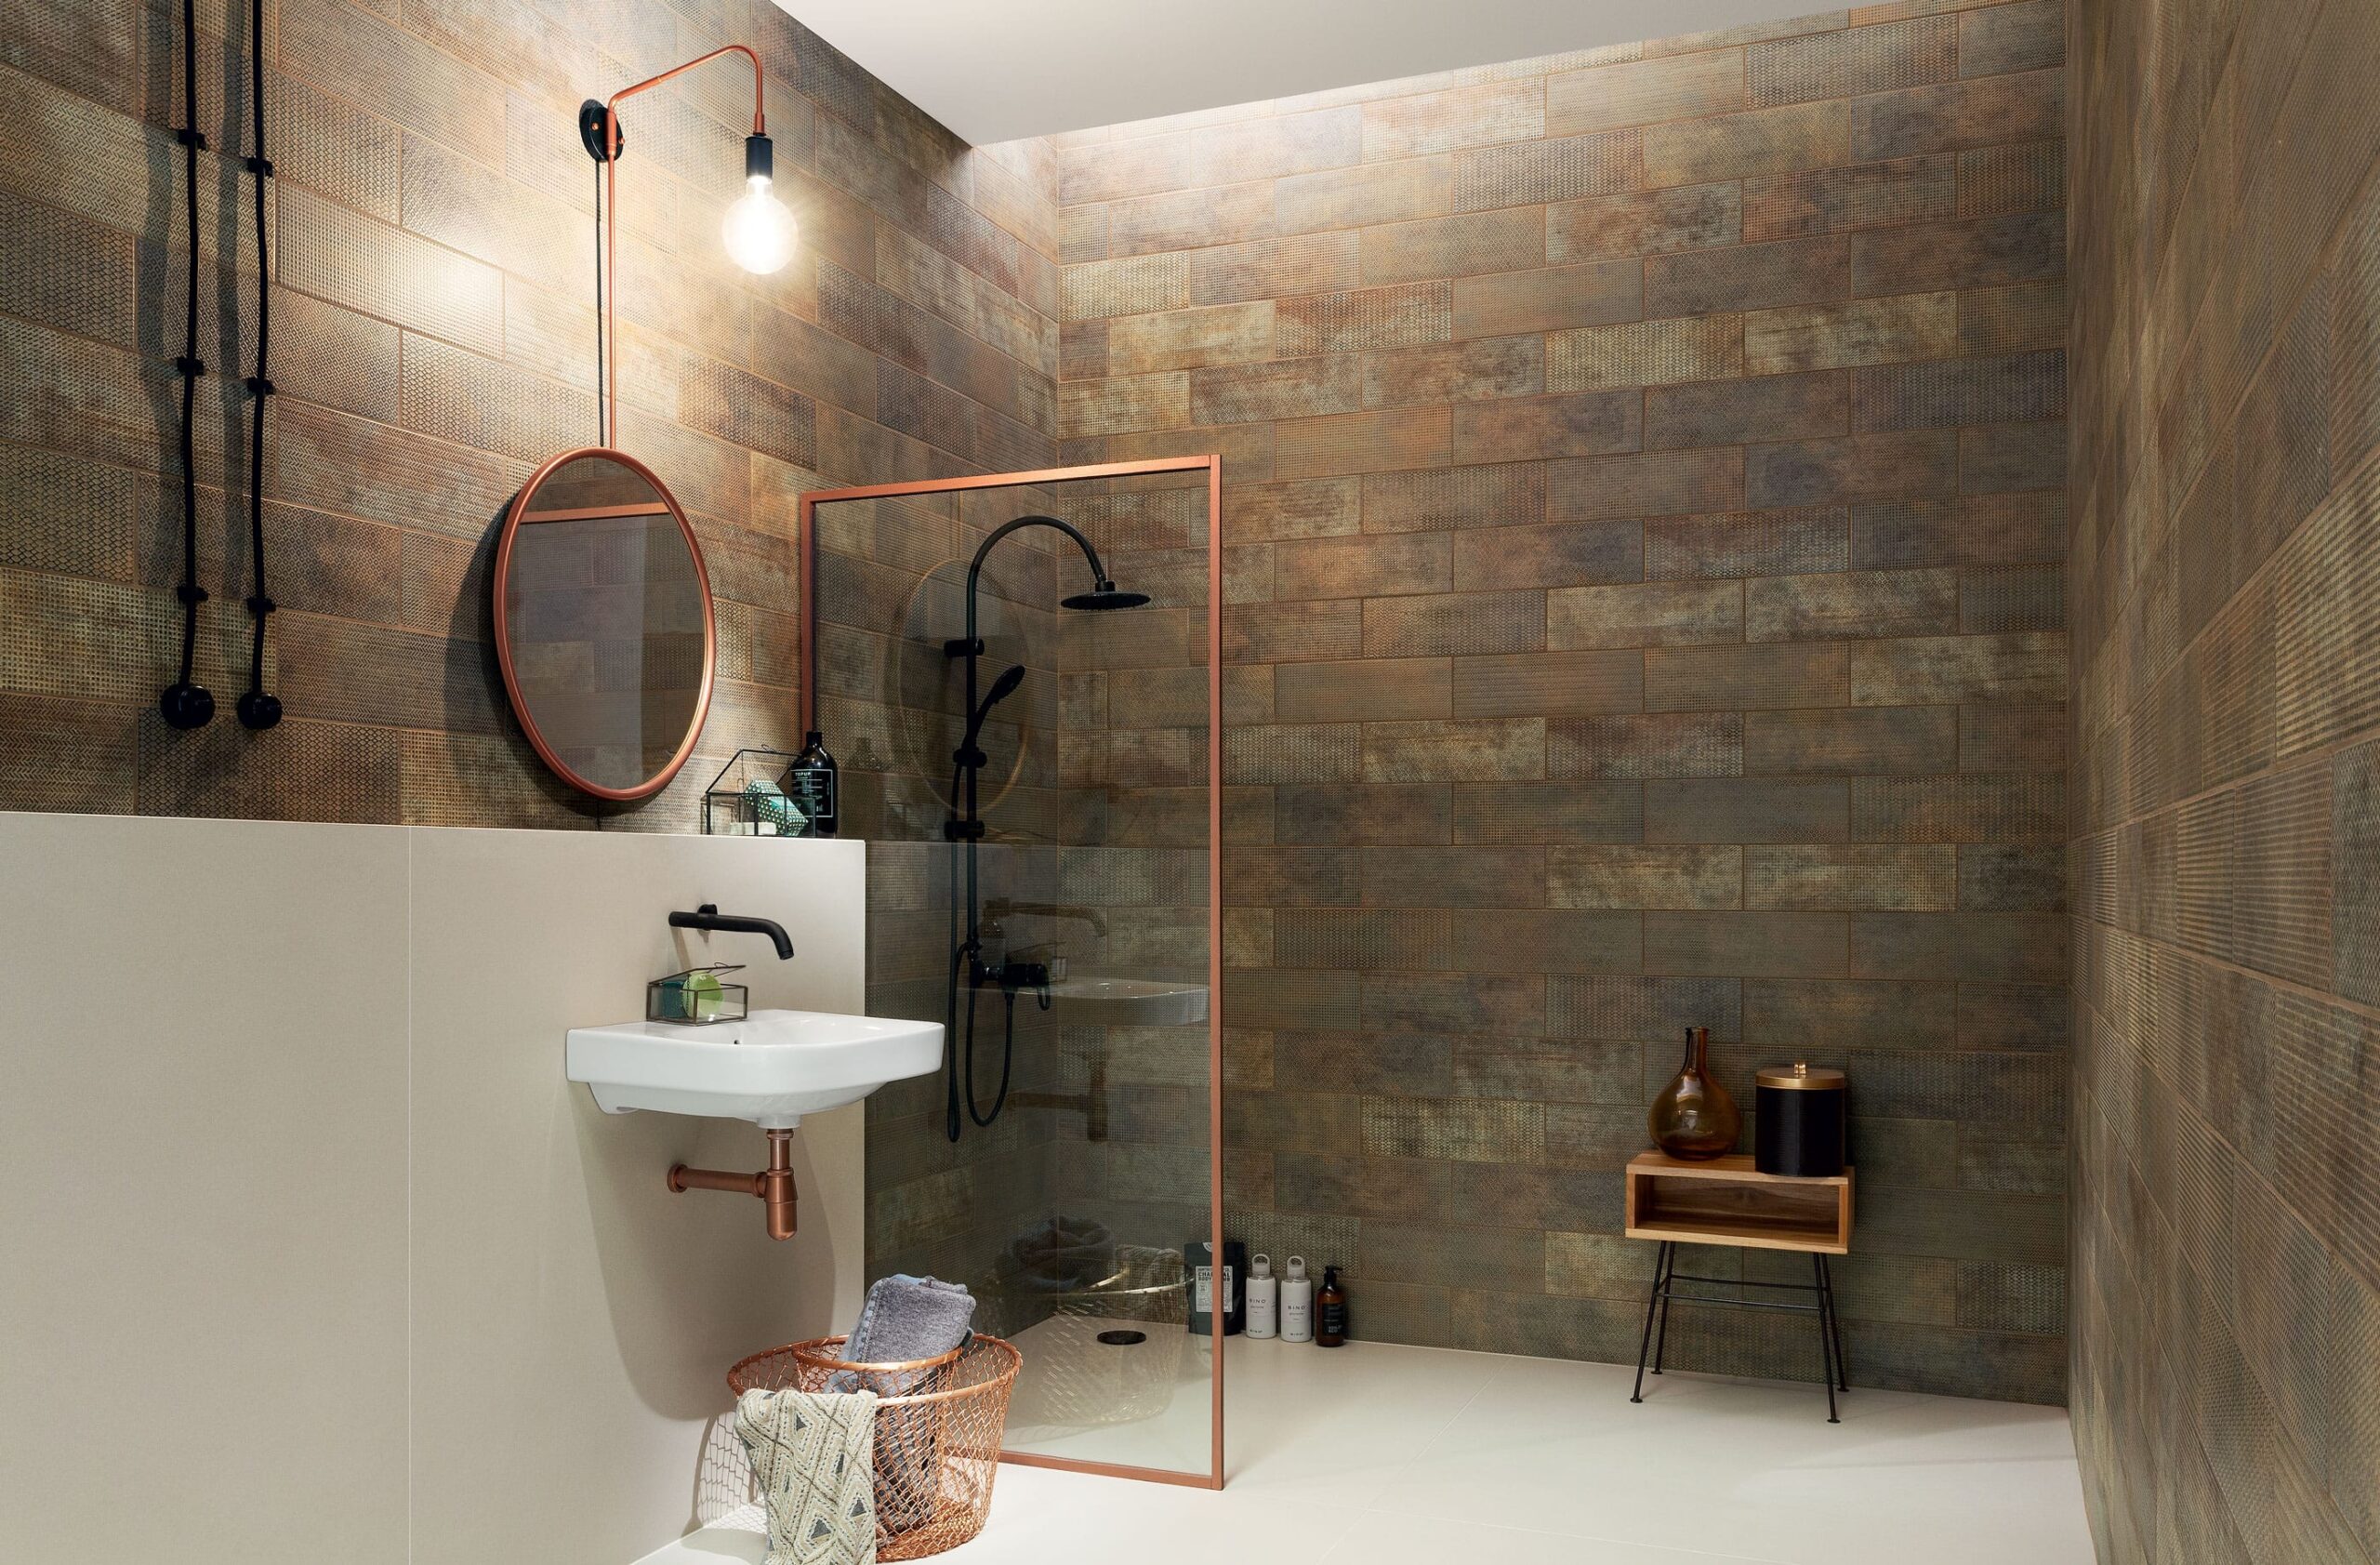 industrial-style bathroom with copper accessories